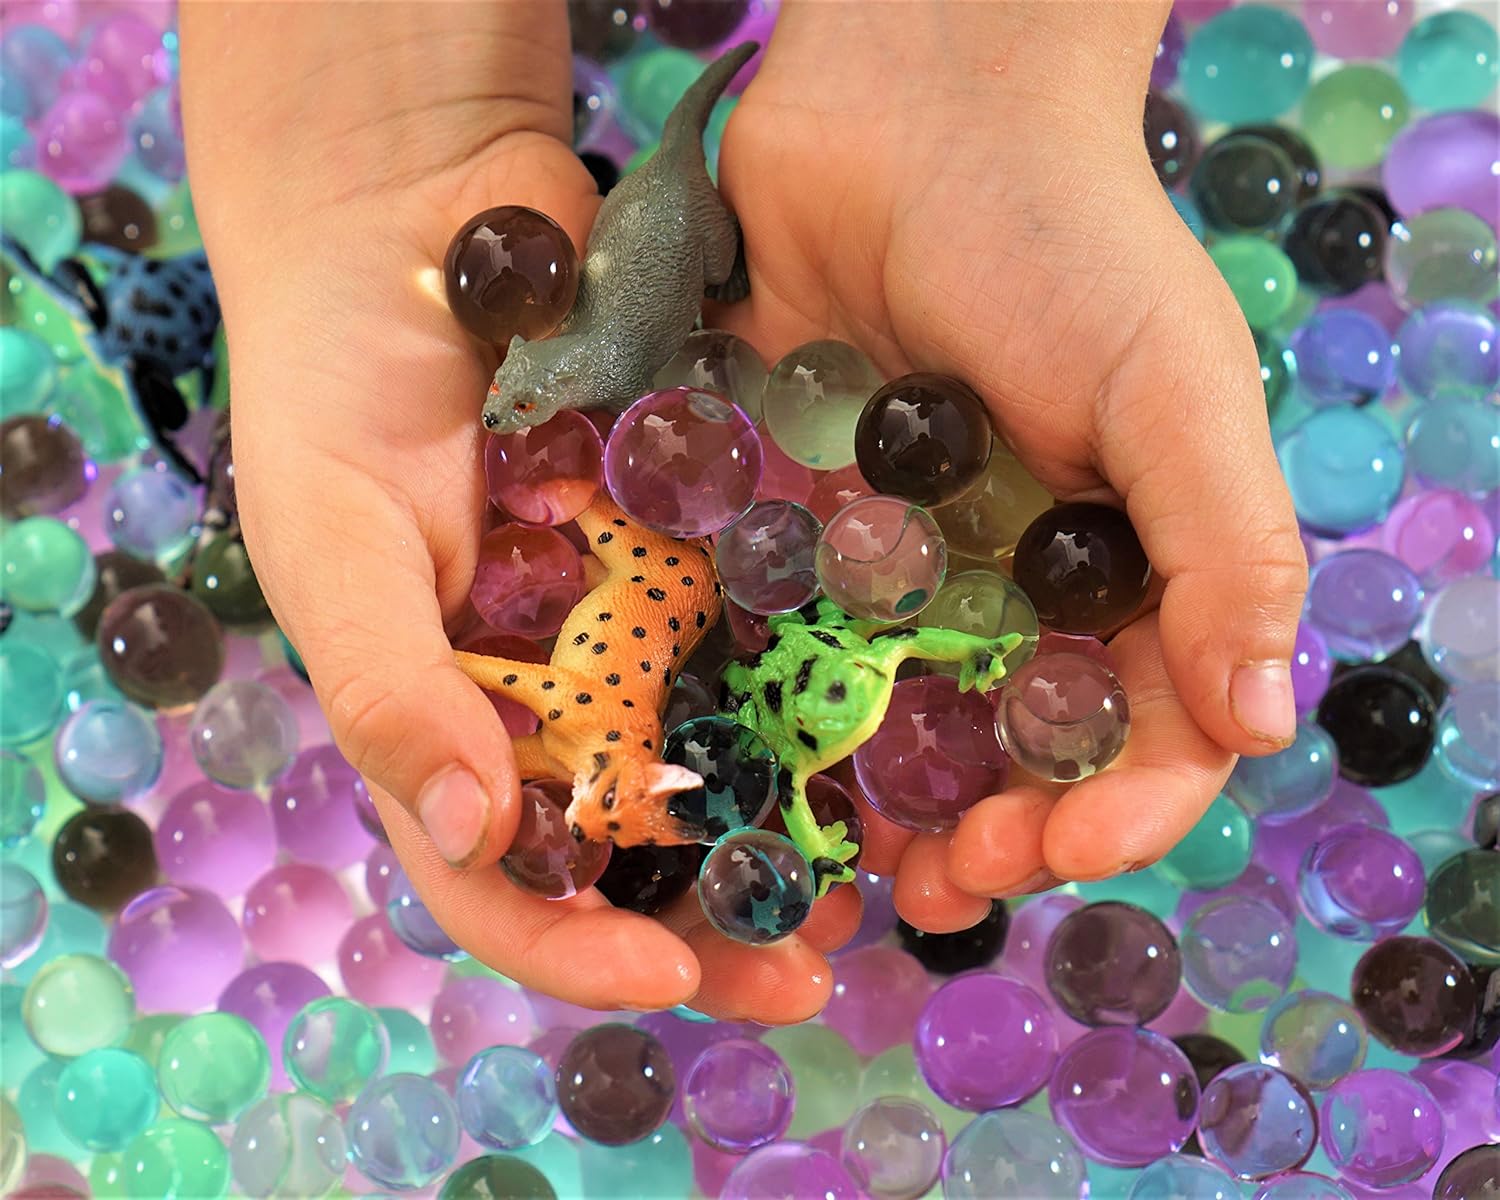 Water Beads Jungle Excursion Tactile Sensory Toys Bin Kit - Rain Forest Toy Animals Included